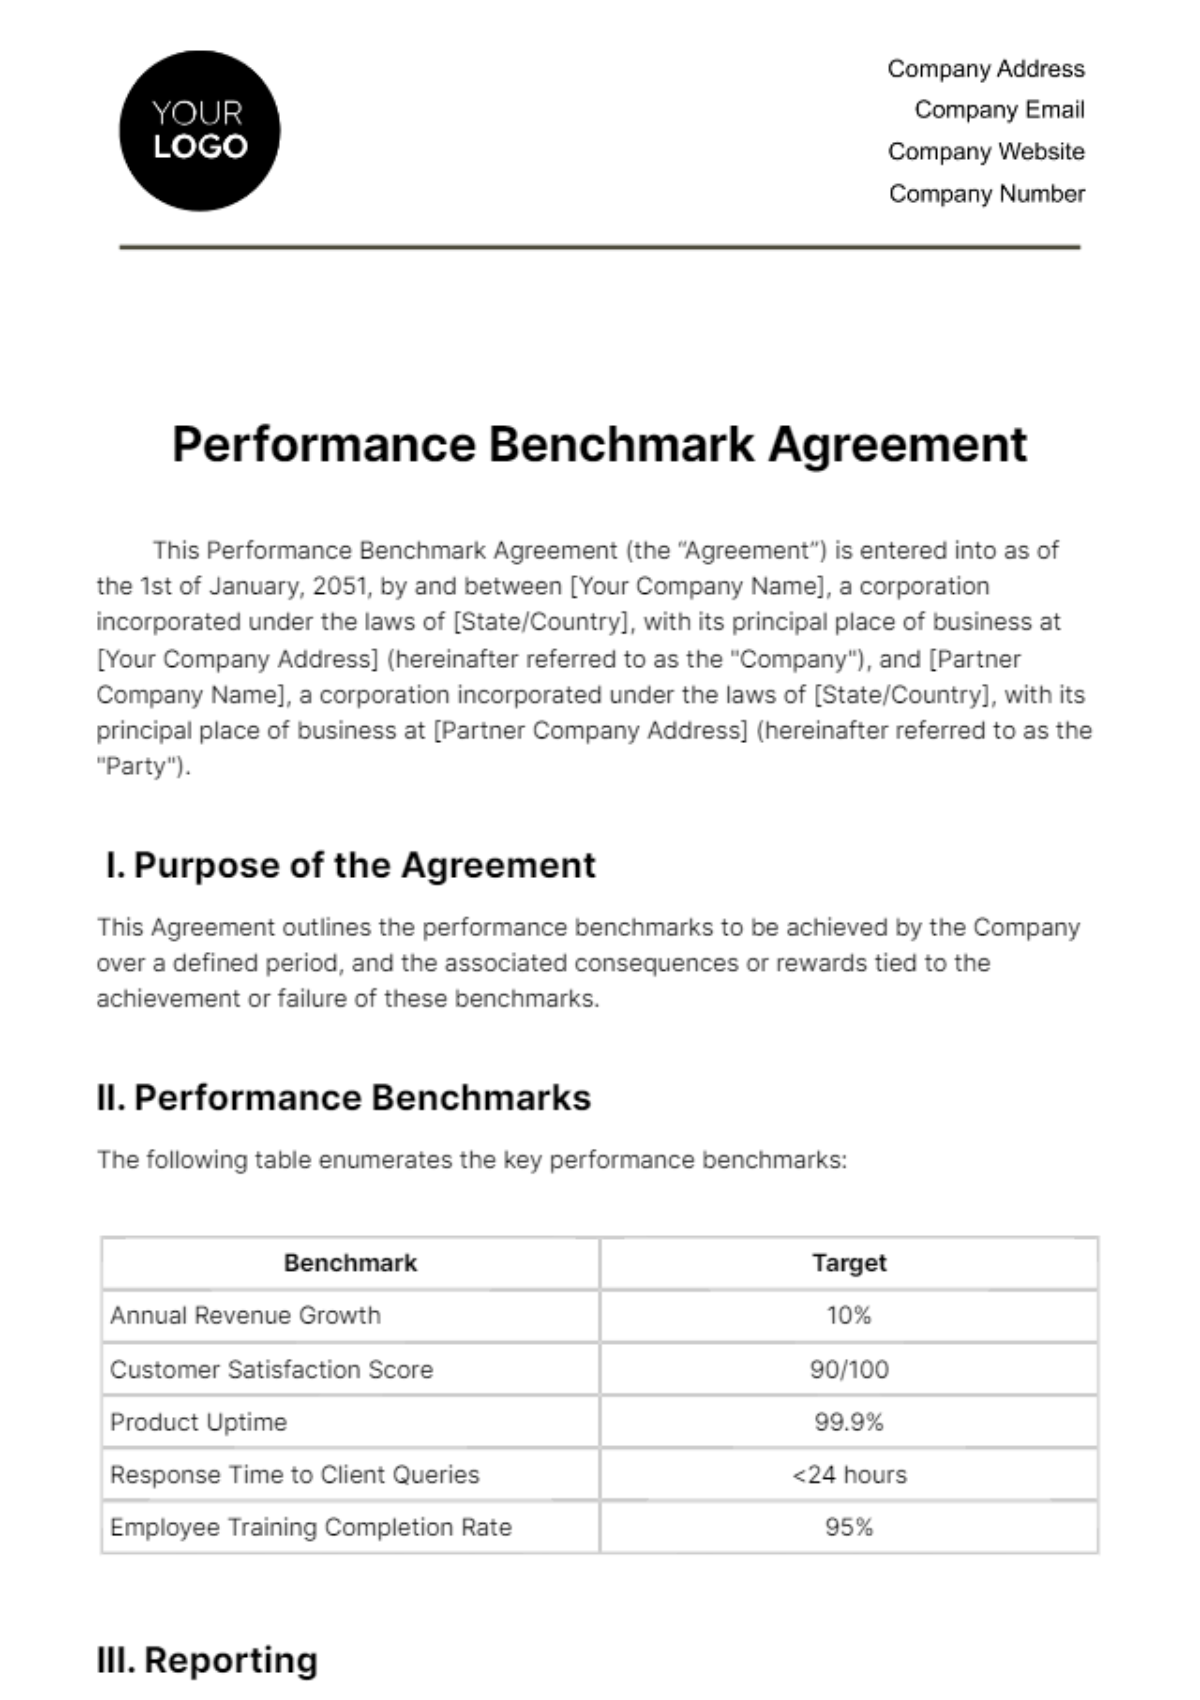 Free Performance Benchmark Agreement HR Template